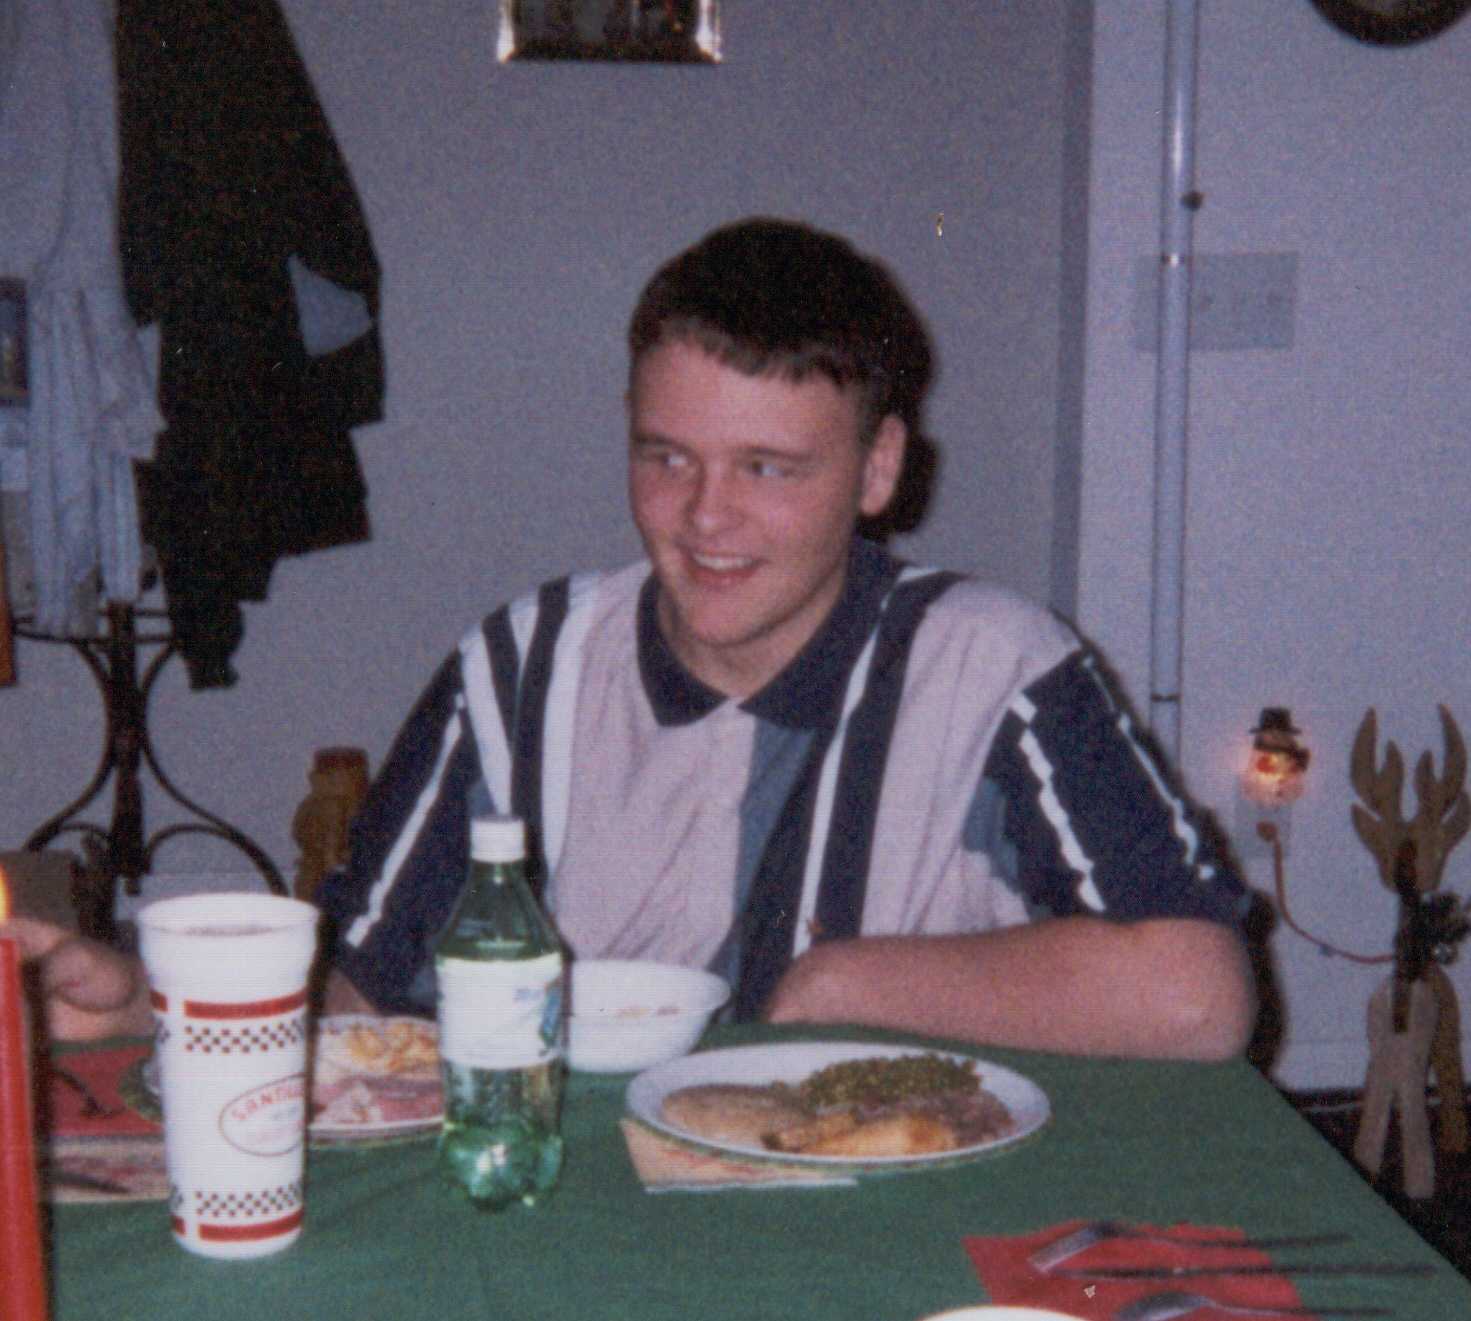 Tommy at Christmas 2000